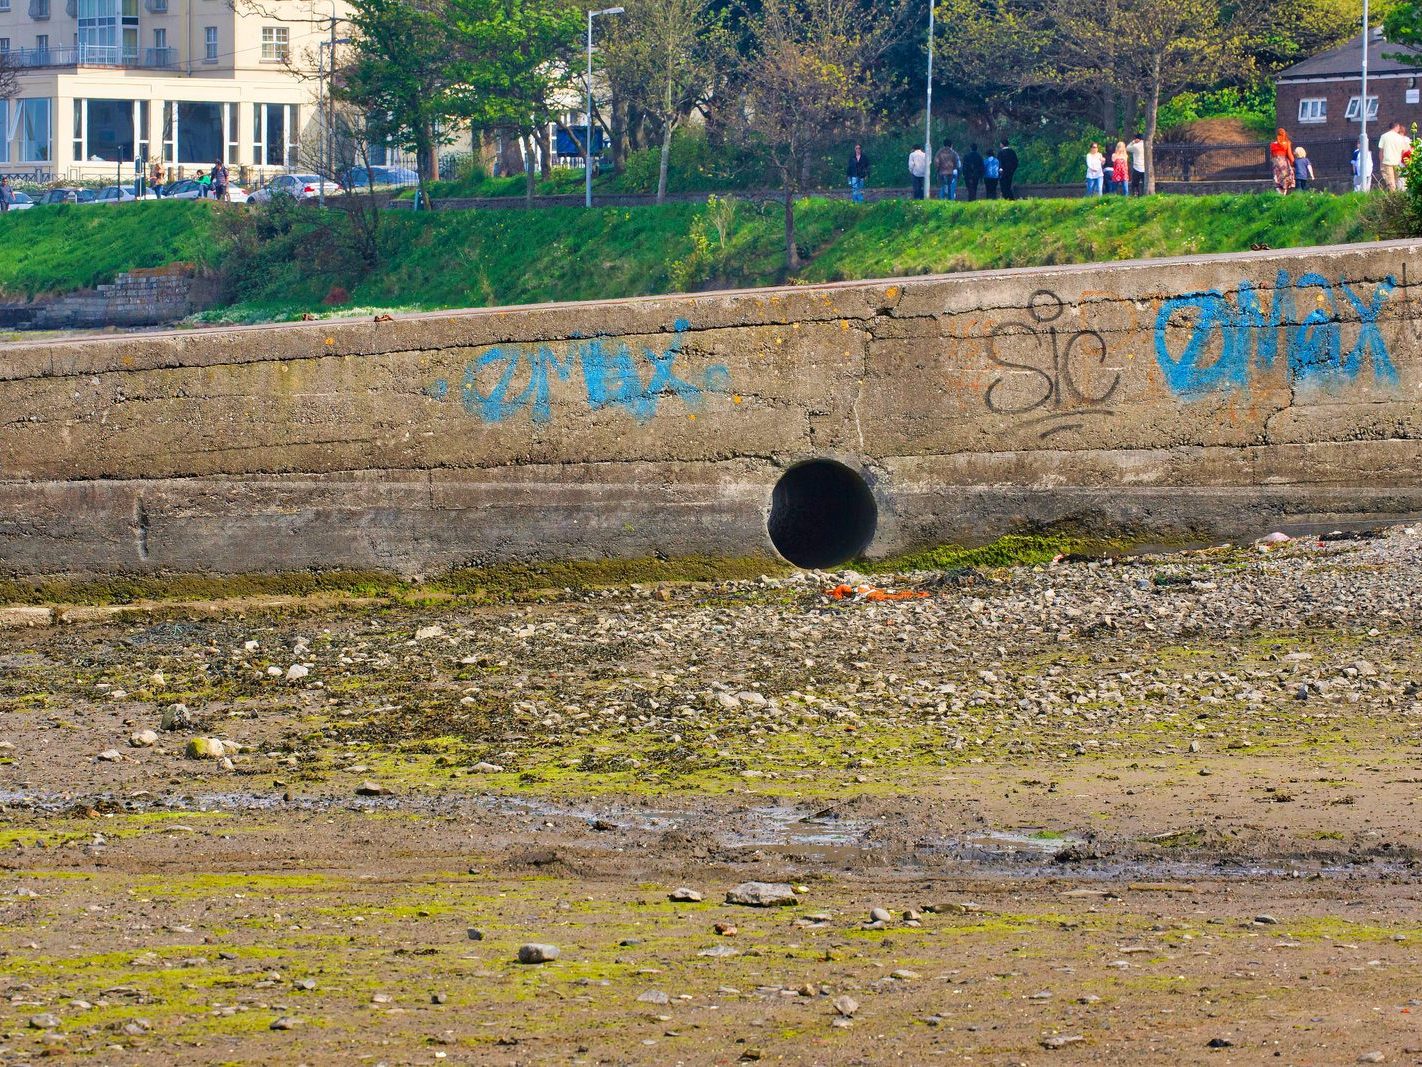 MALAHIDE SEAFRONT IN 2008 NEAREST THE TOWN OR THE LESS ATTRACTIVE SECTION 007